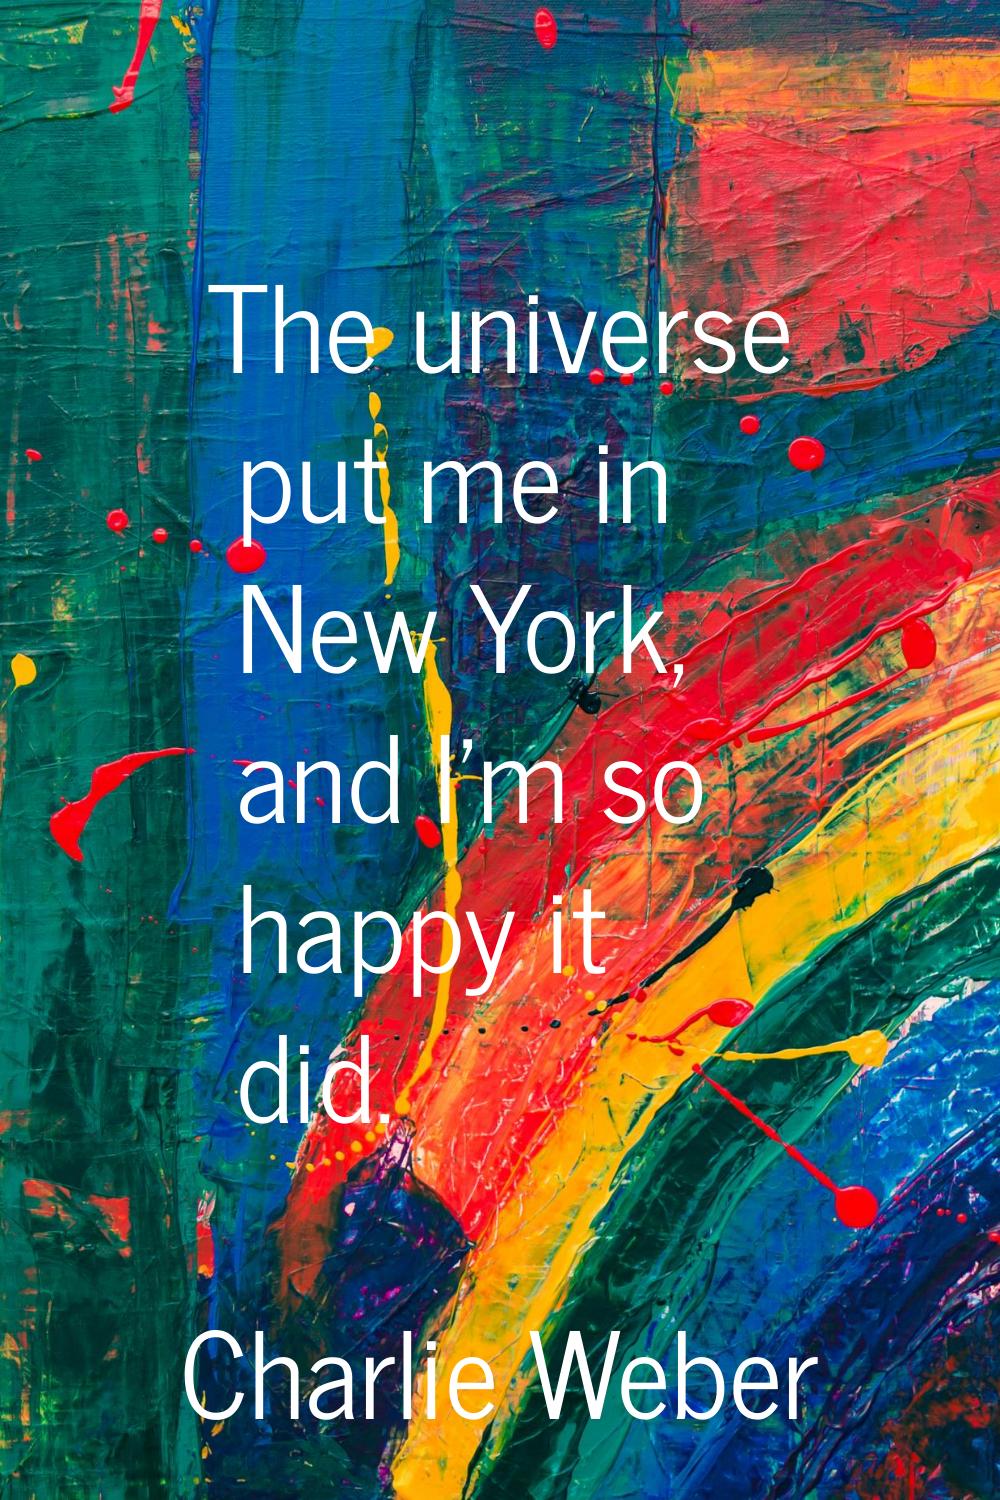 The universe put me in New York, and I'm so happy it did.